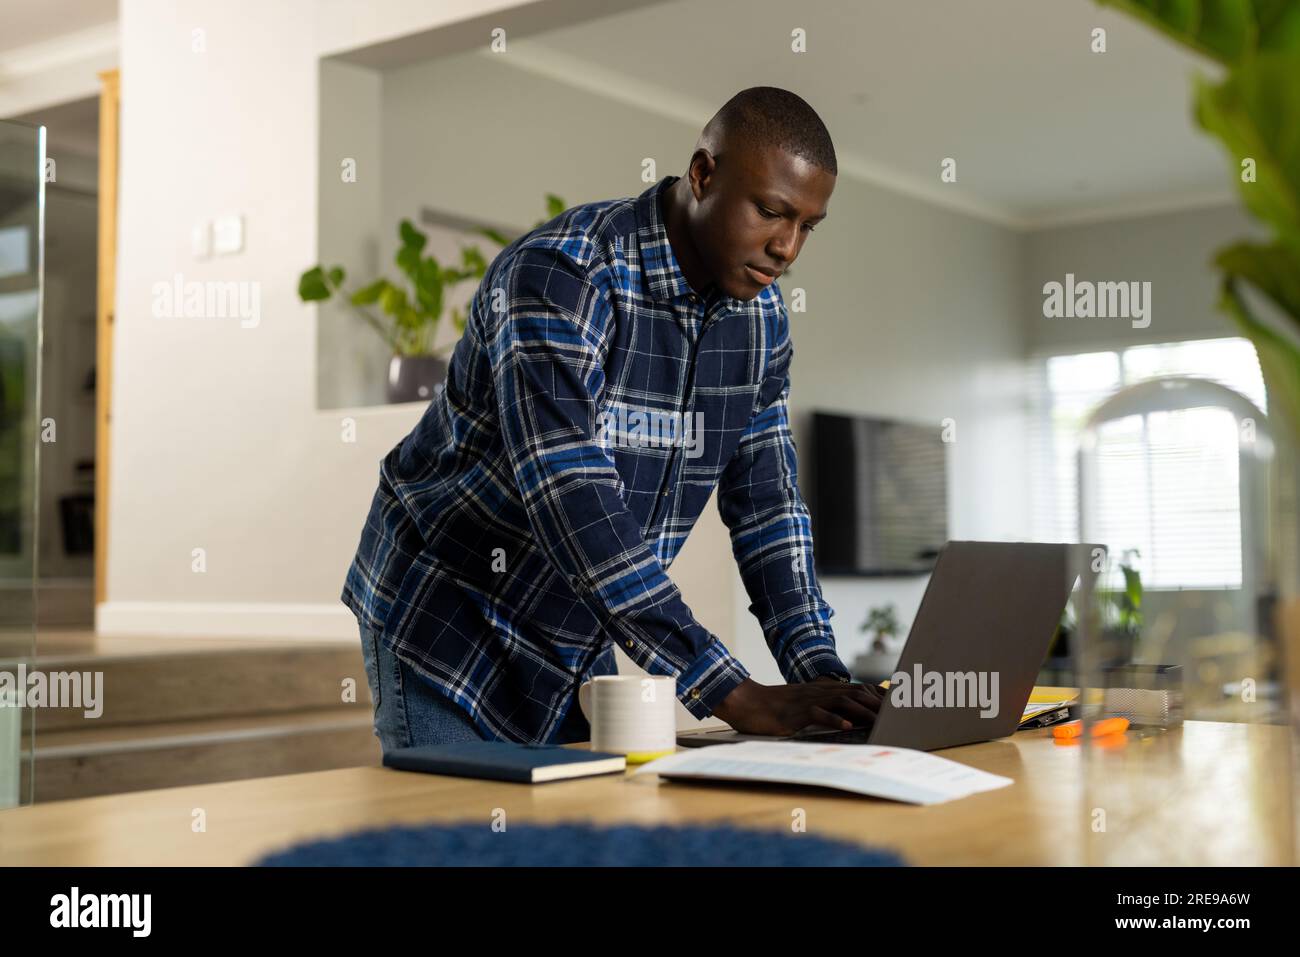 African american man standing at table using laptop at home Stock Photo